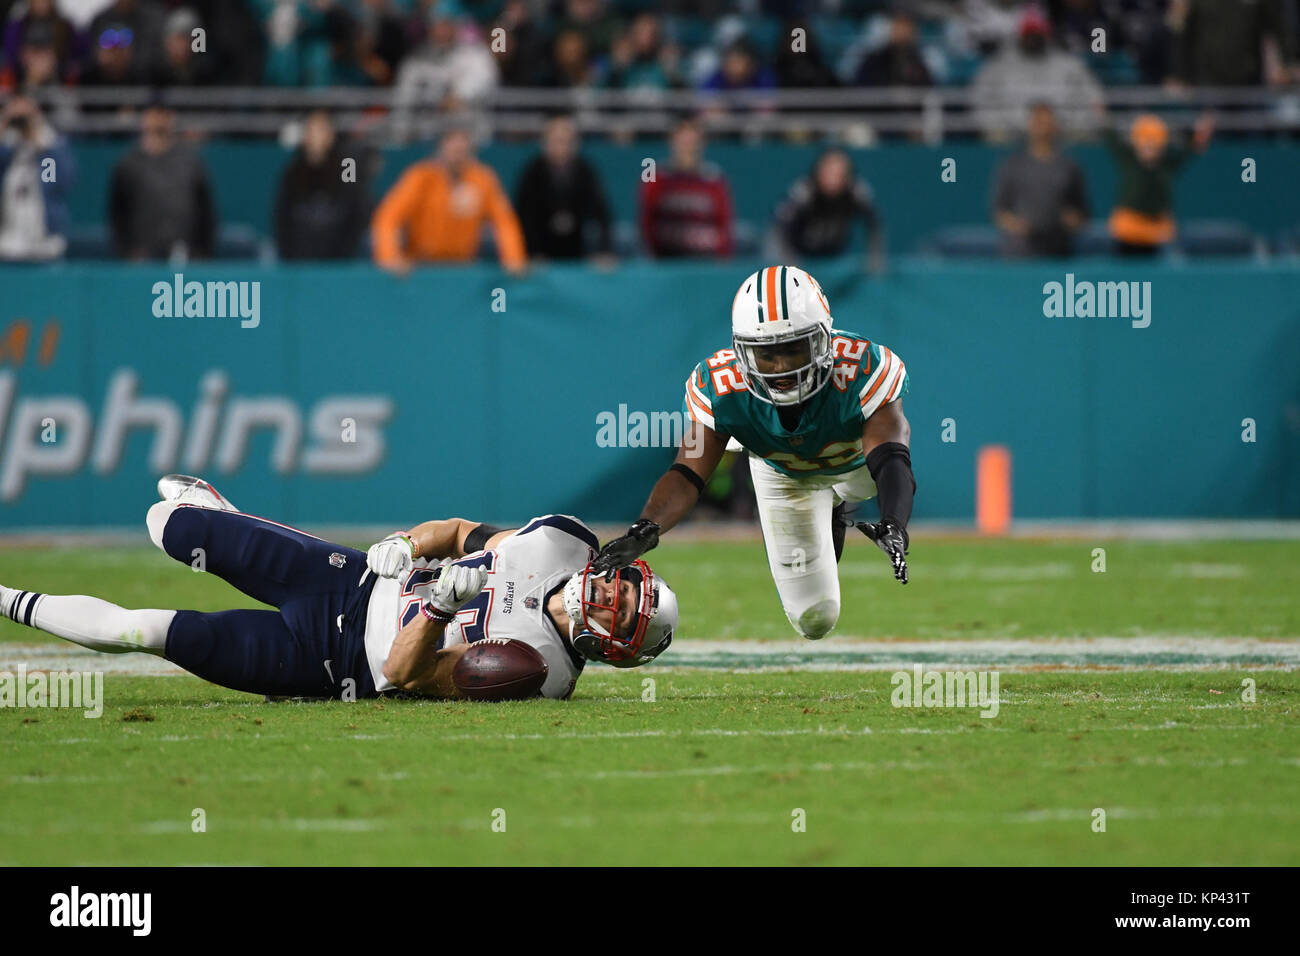 Miami Gardens FL, USA. 11th Dec, 2017. Chris Hogan #15 of New England is defended by Alterraun Verner #42 of Miami during the NFL football game between the Miami Dolphins and New England Patriots at Hard Rock Stadium in Miami Gardens FL. The Dolphins defeated the Patriots 27-20. Credit: csm/Alamy Live News Stock Photo